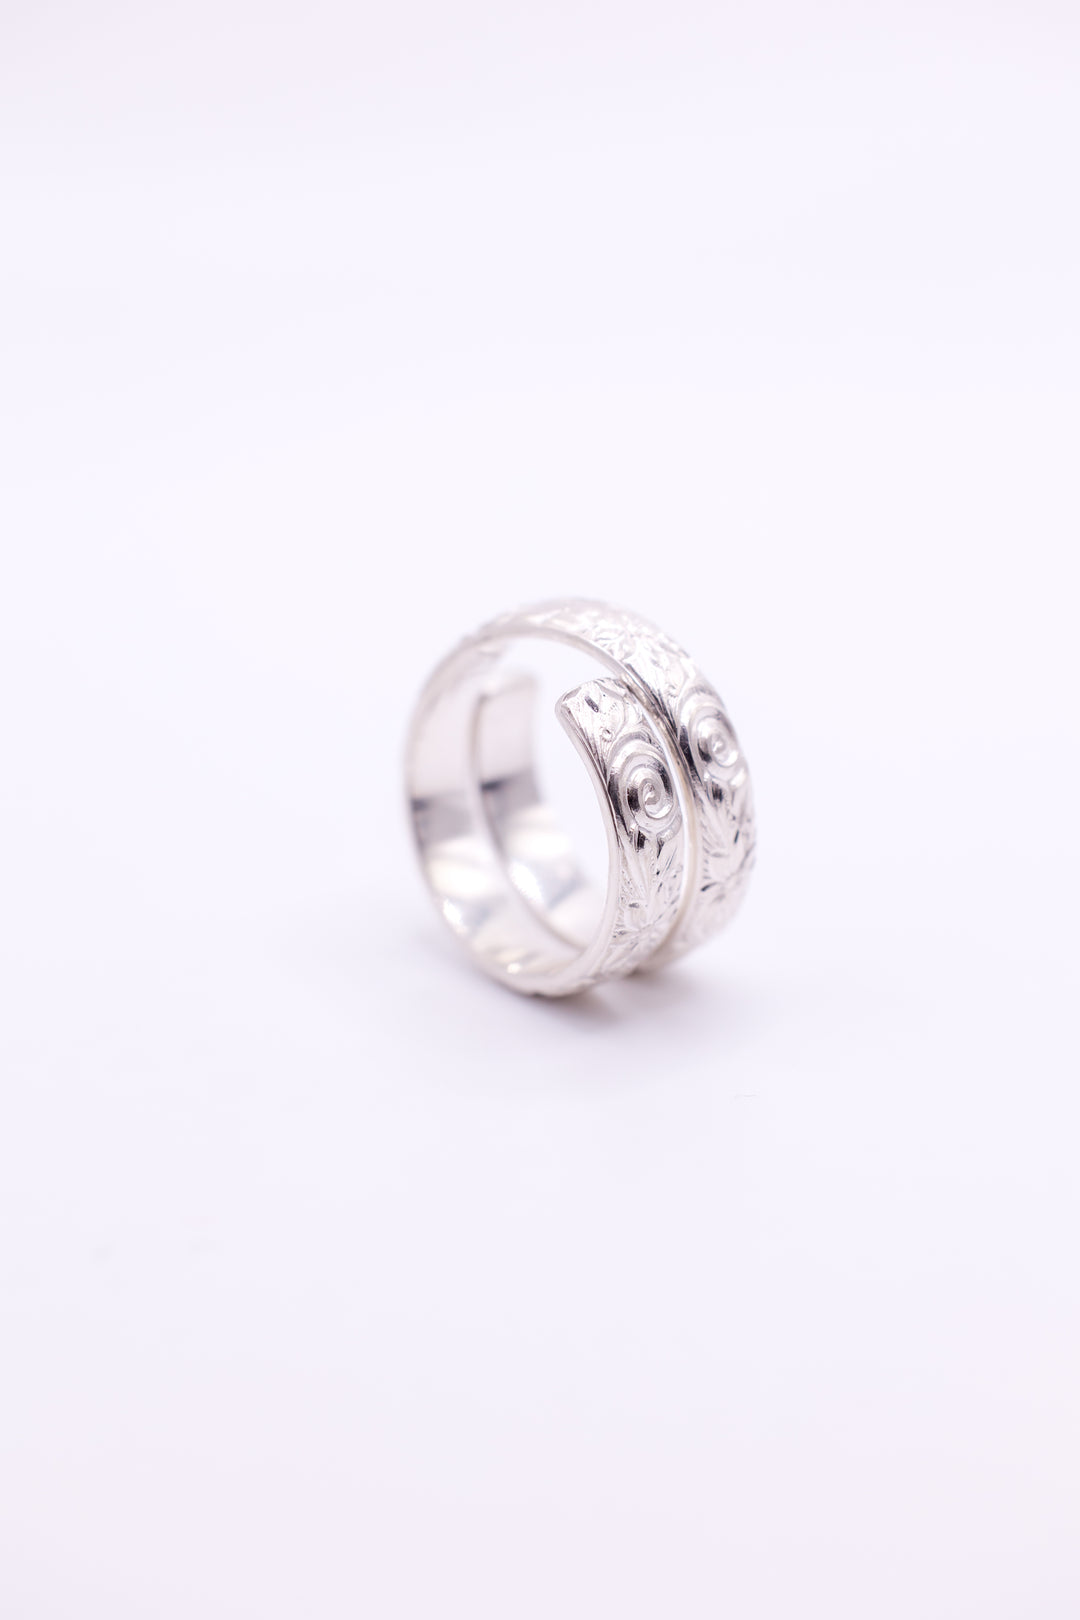 Sterling Silver Floral Wrap Ring in Lexington, Kentucky by Anna Shae Jewelry 